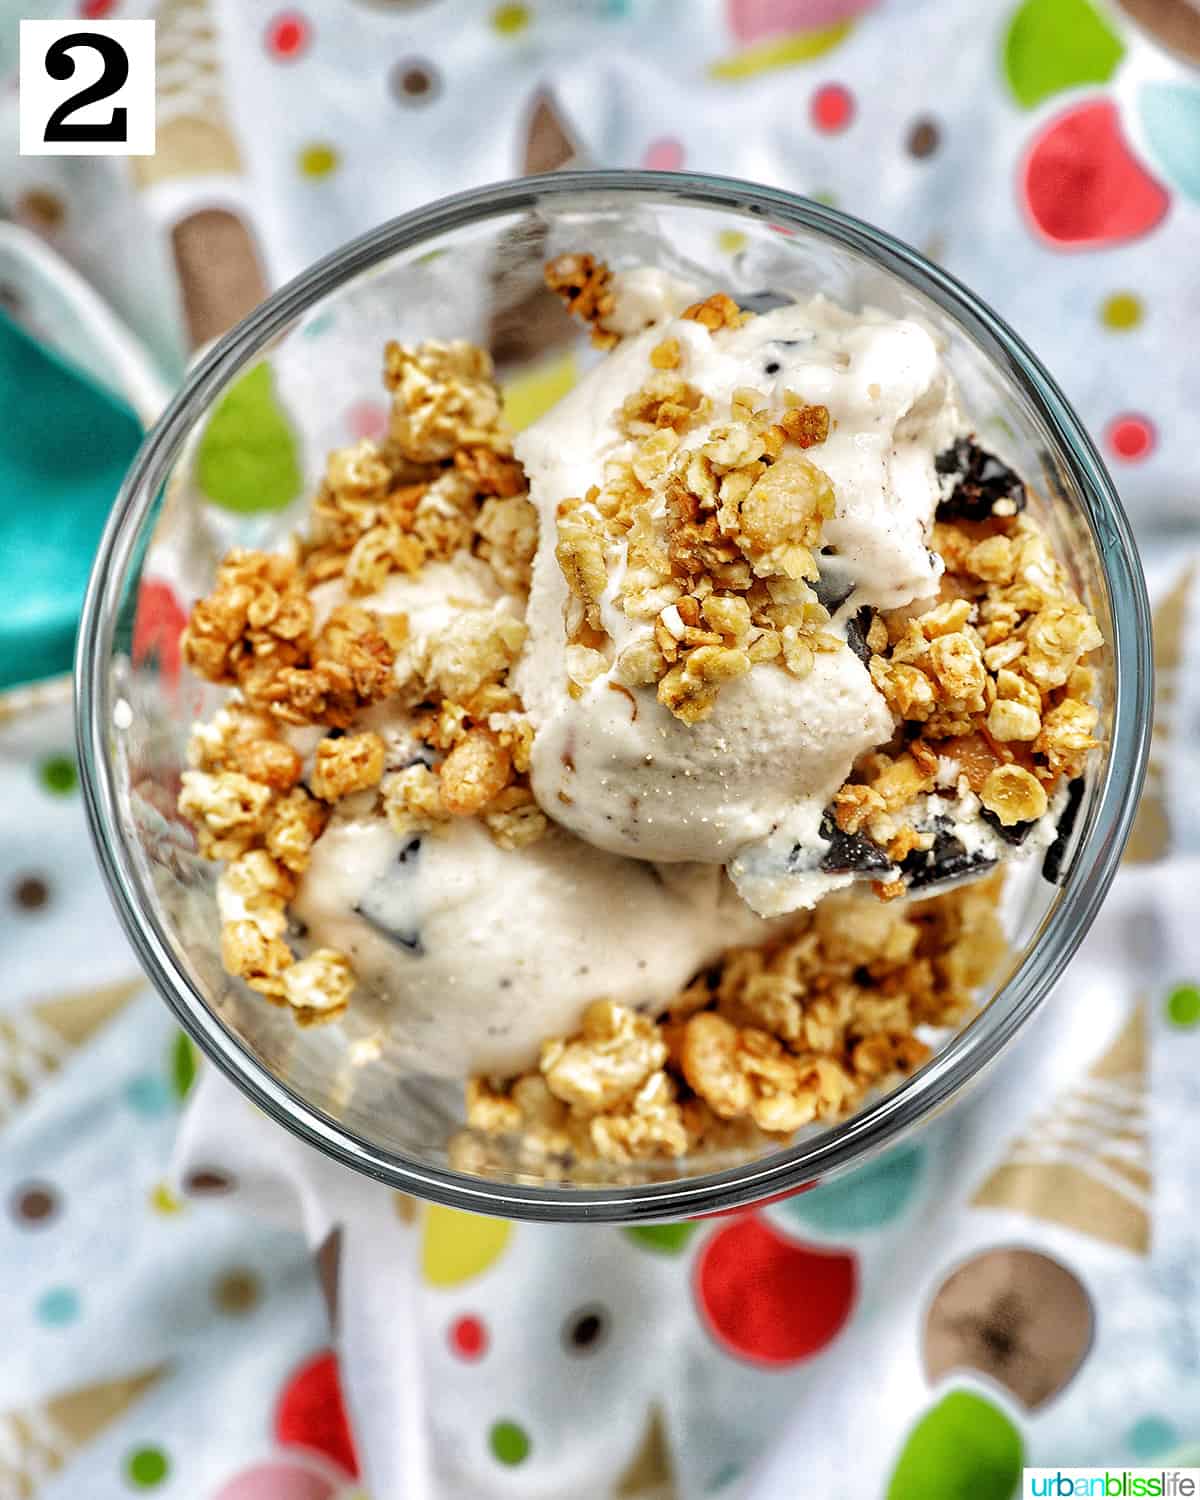 ice cream parfait topped with granola, on a colorful kitchen towel.